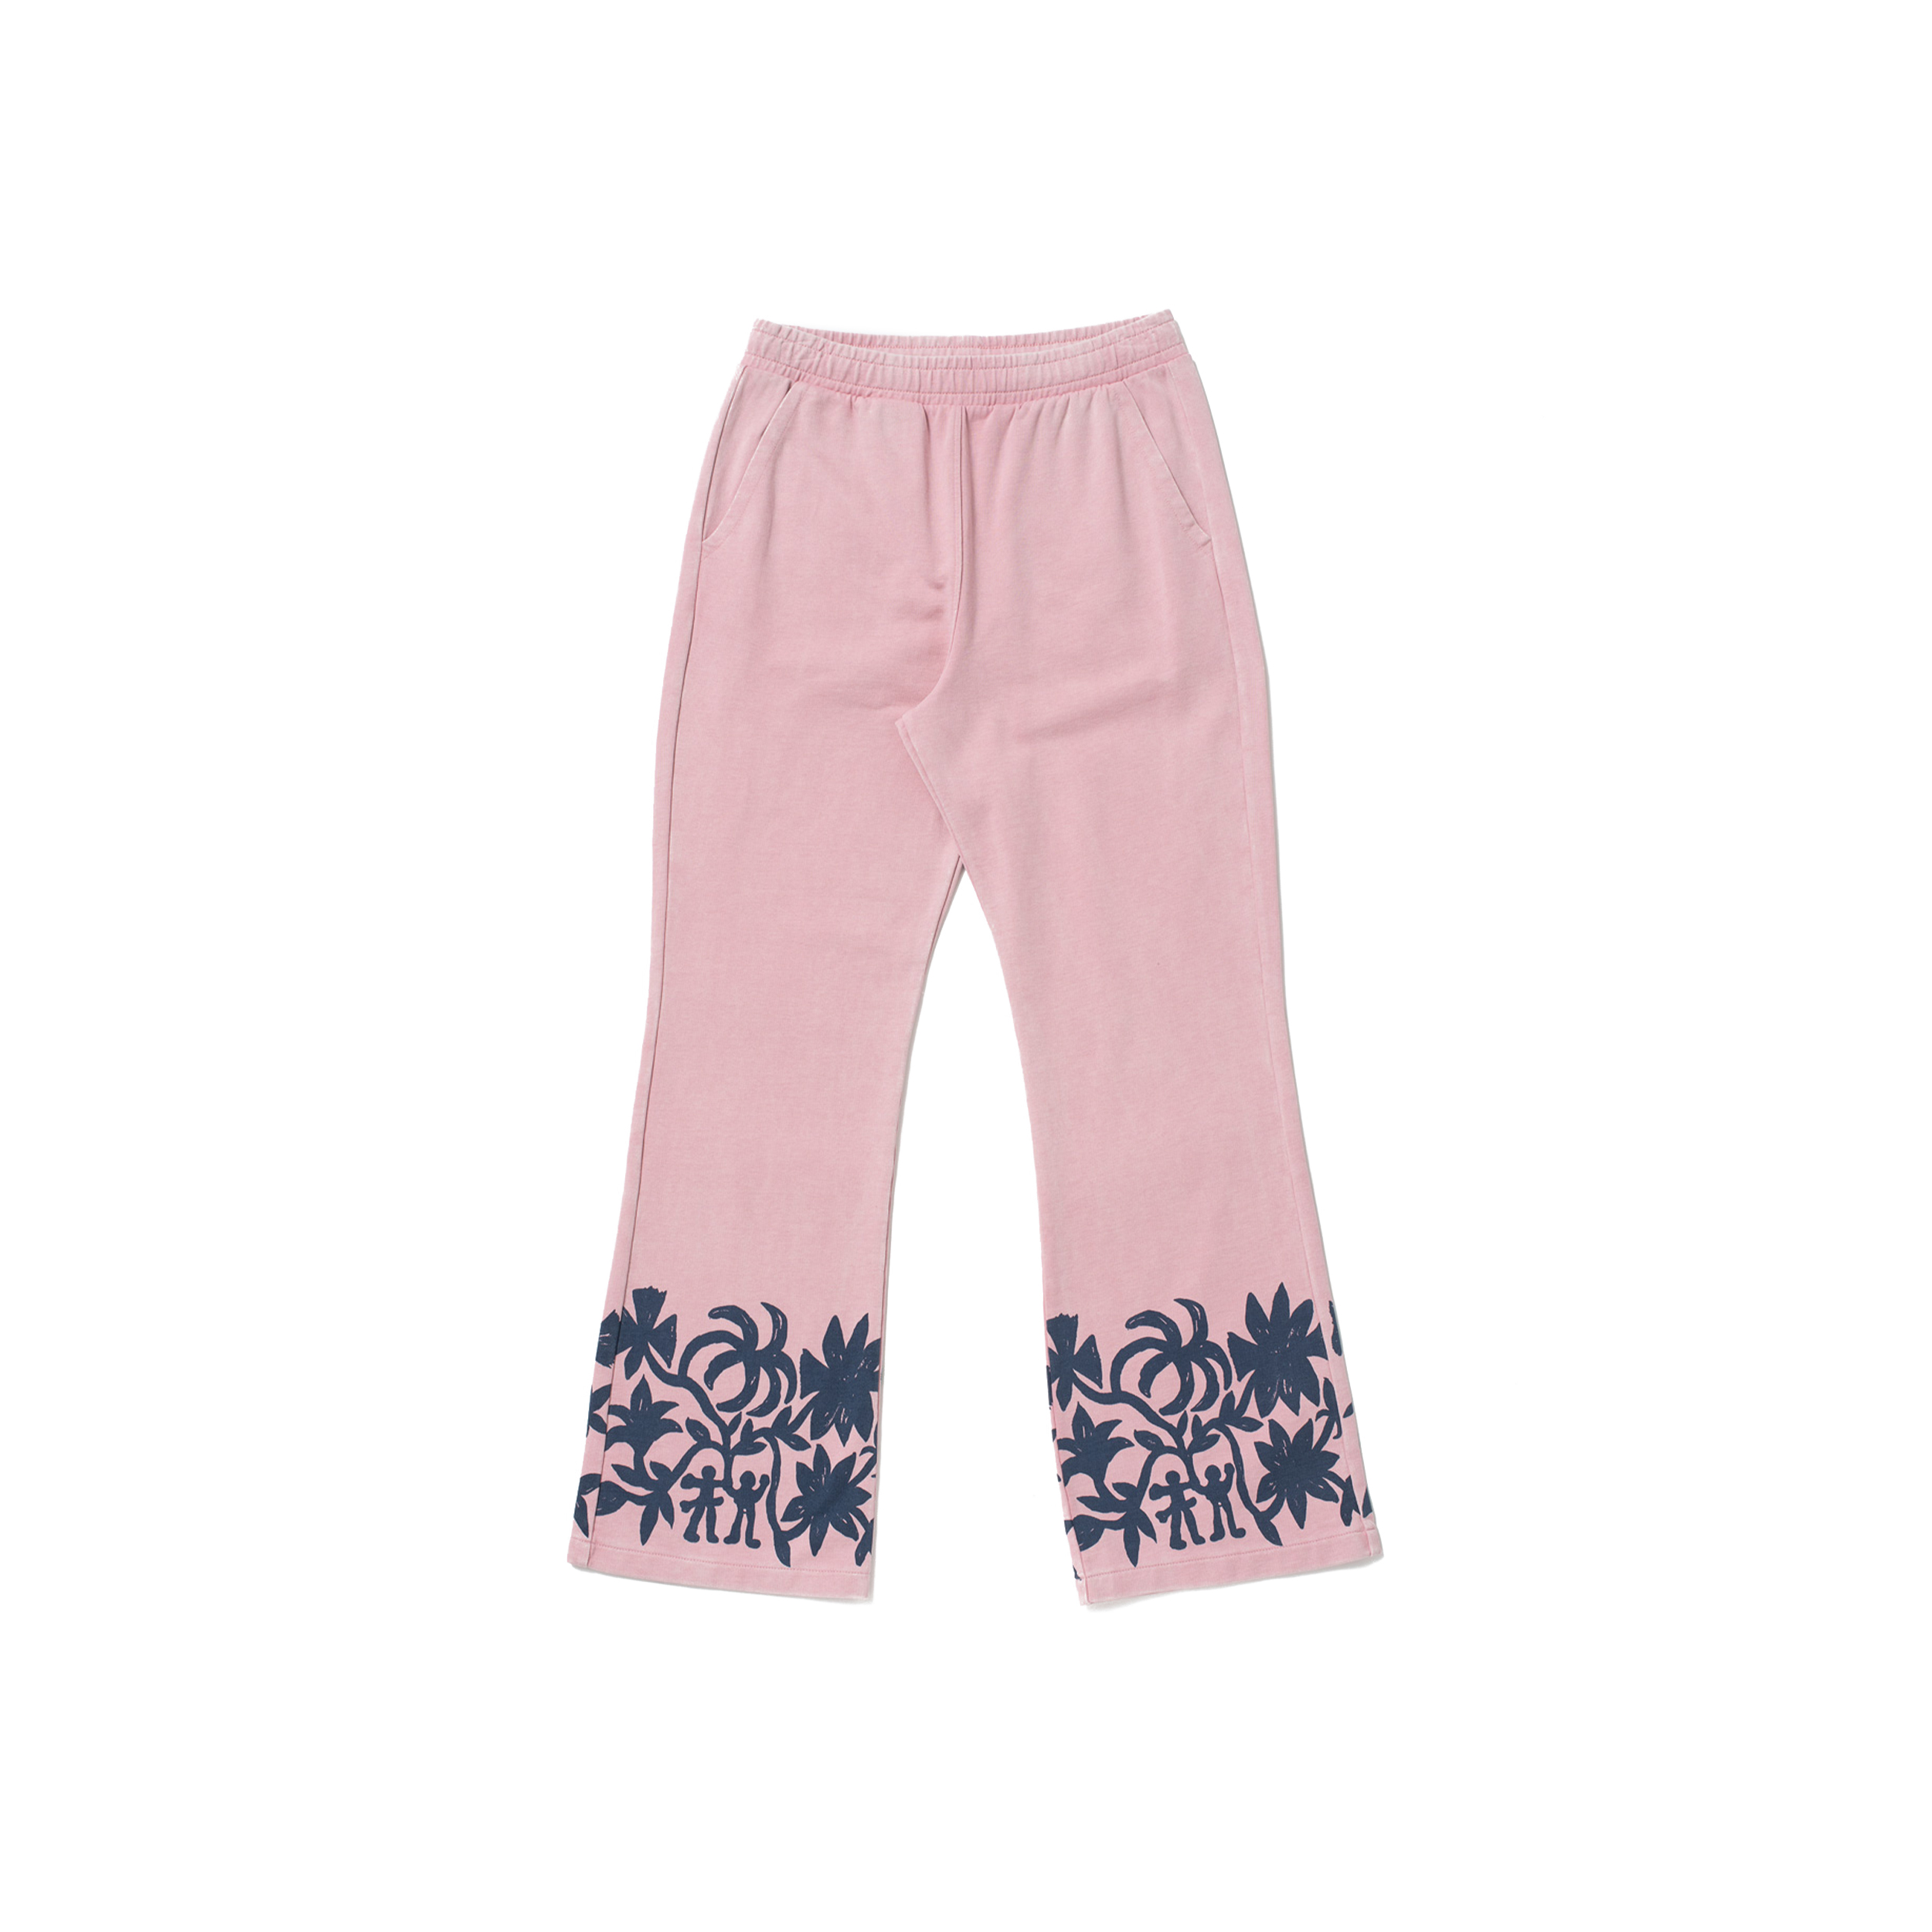 IN THE BUSH SWEATPANTS – WASHED PINK - Siwilai